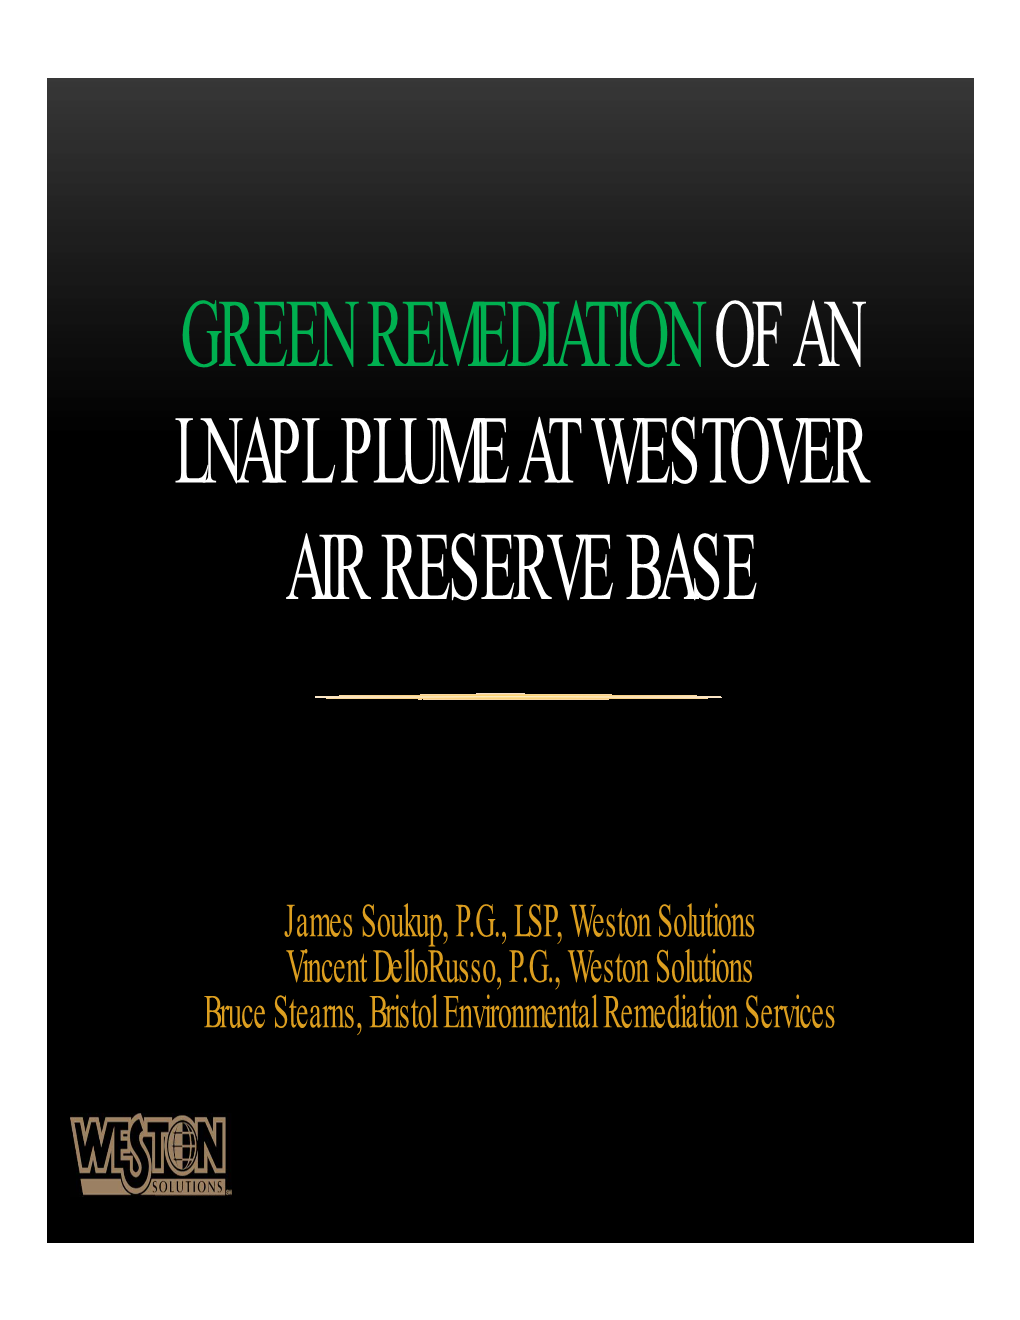 Green Remediation of an Lnapl Plume at Westover Air Reserve Base